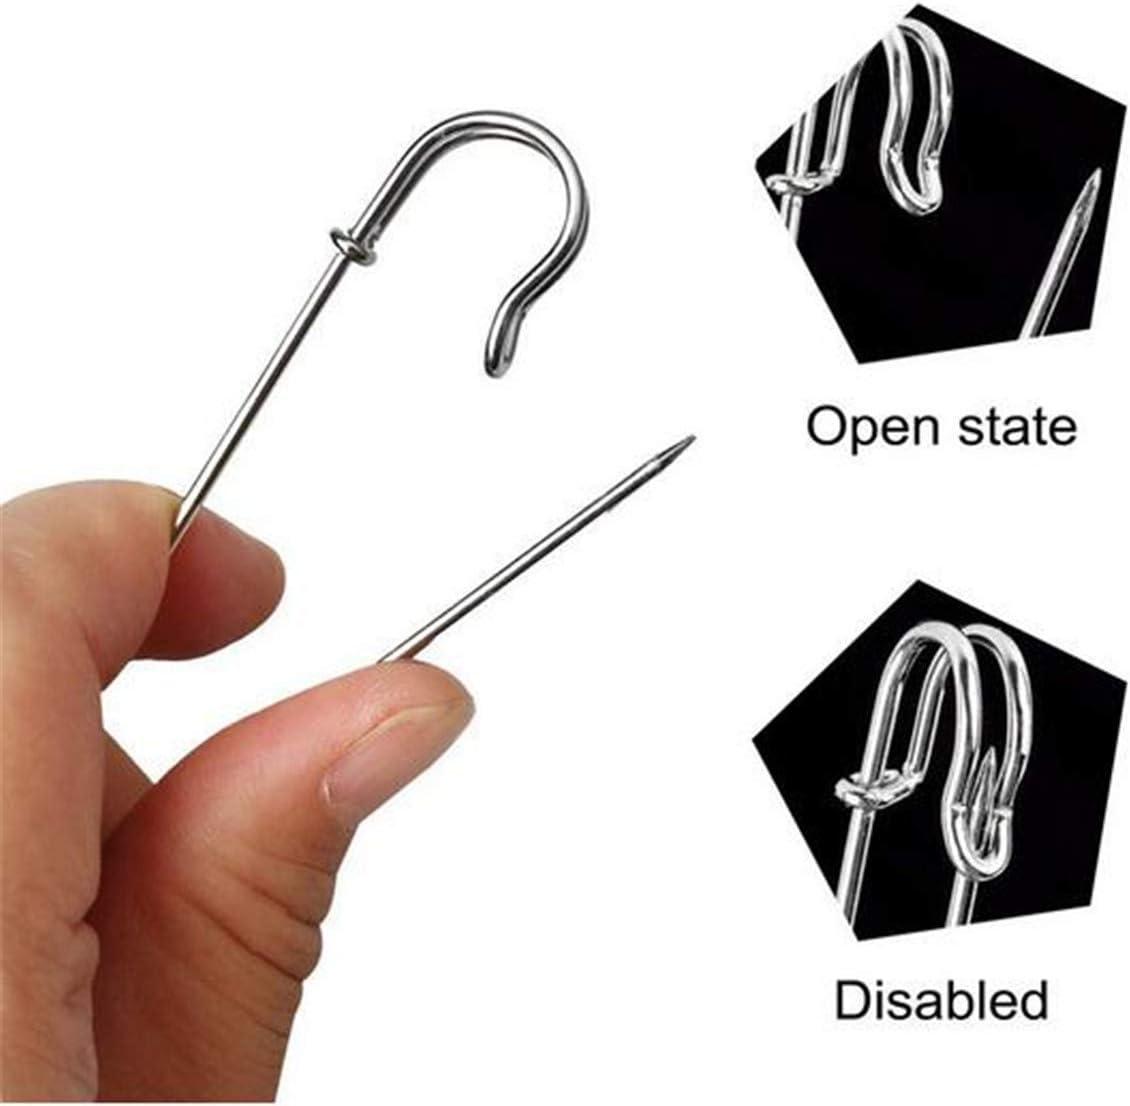 Pack of 30 Safety Pins , Heavy Duty Blanket Pins Bulk Steel Spring Lock  Pins Fasteners for Blankets Crafts Skirts Kilts Brooch Making